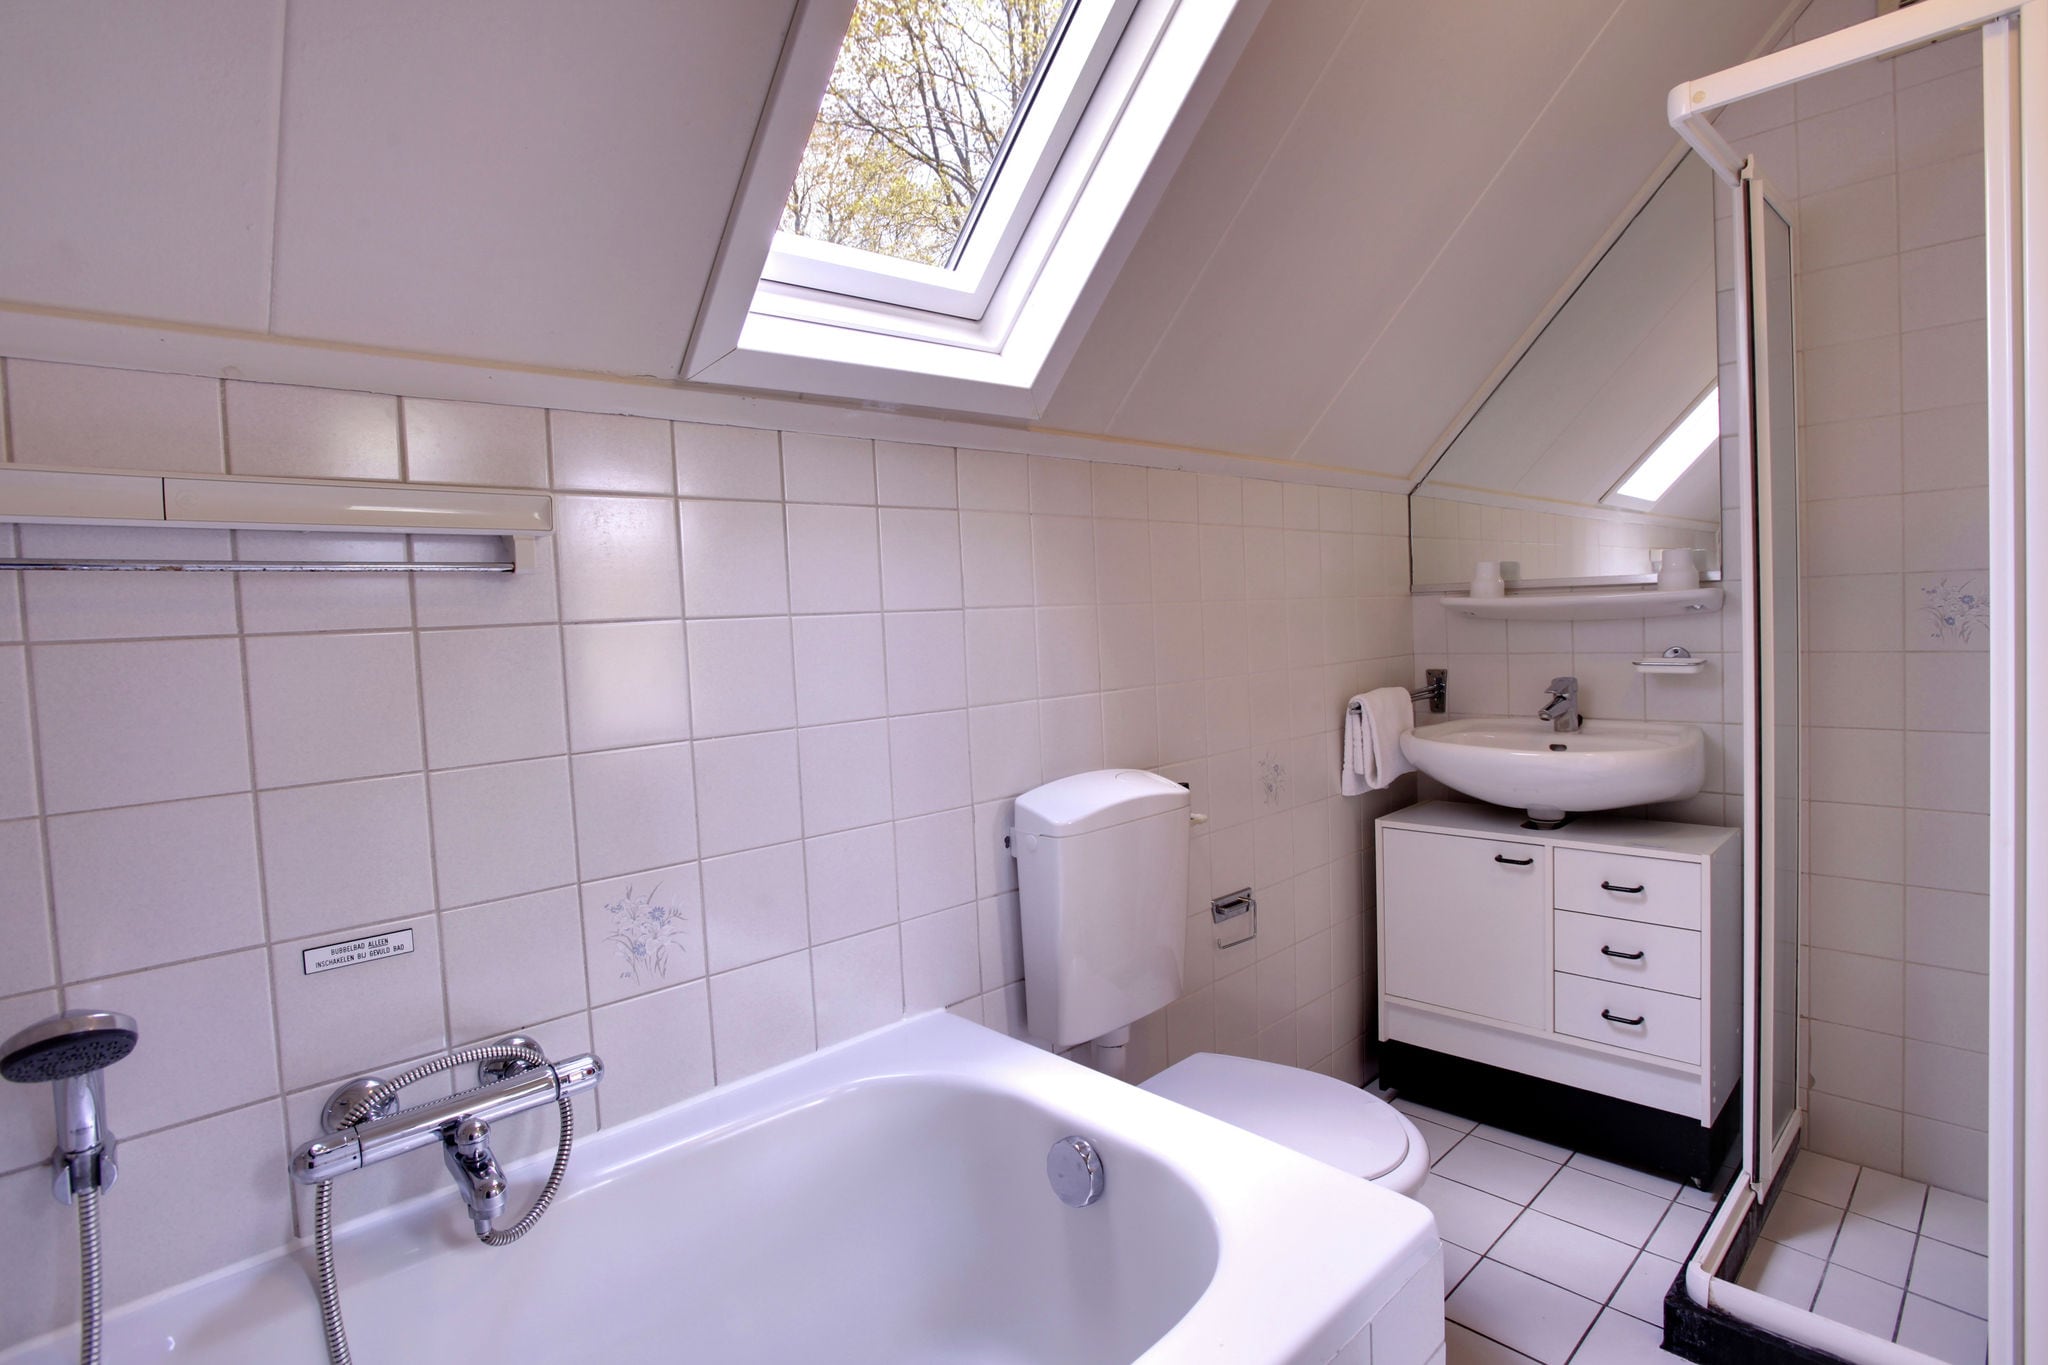 Cozy holiday home with a bubble bath, near Zwolle